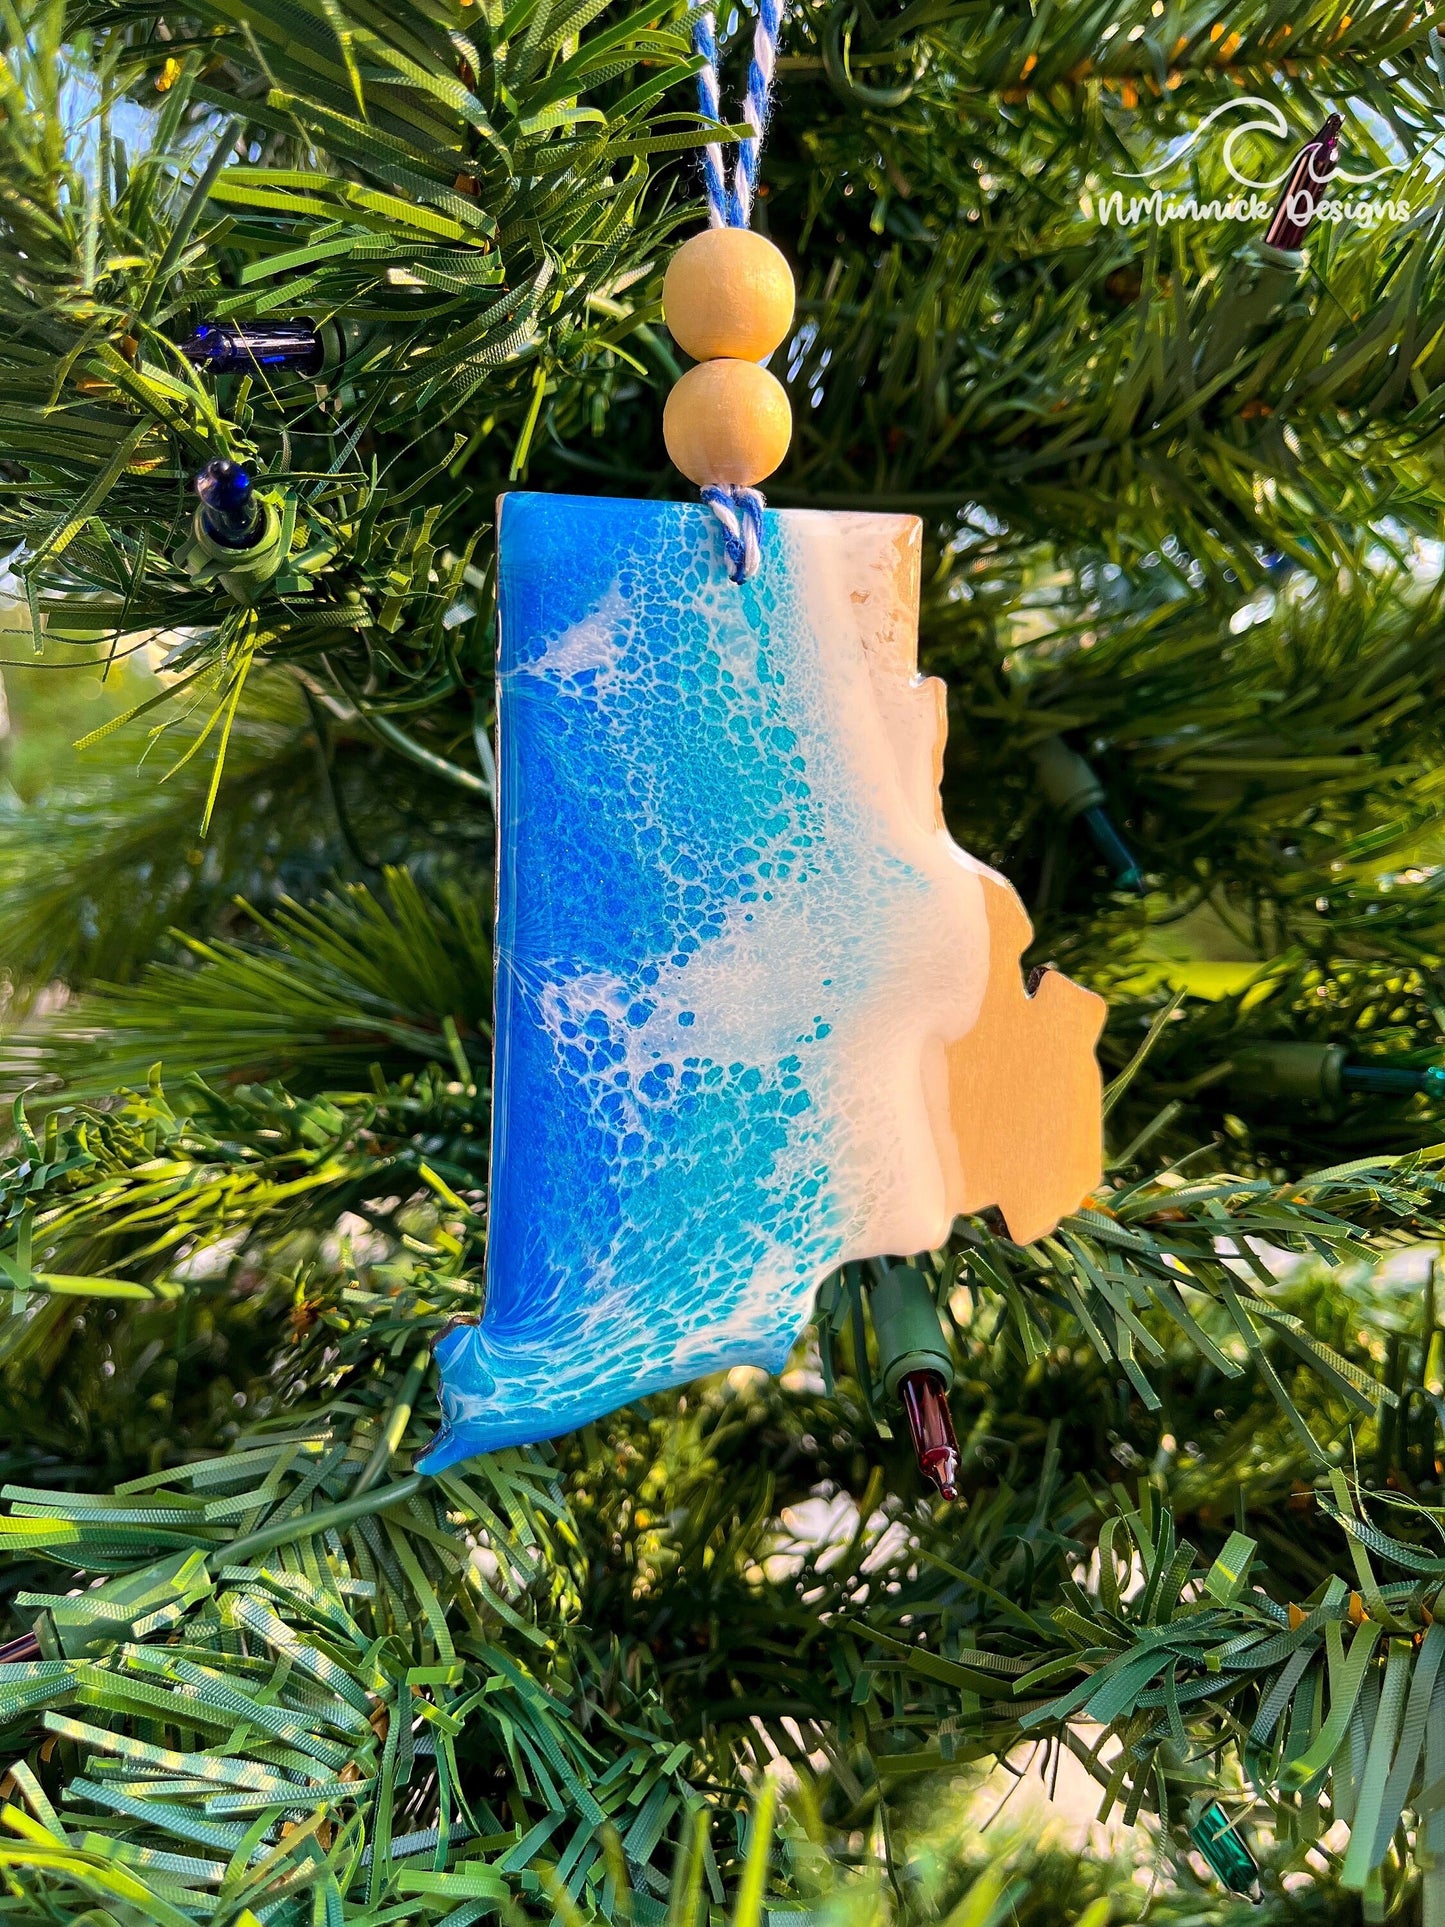 Rhode Island shaped wooden ornament with ocean resin art and hanging from a christmas tree.